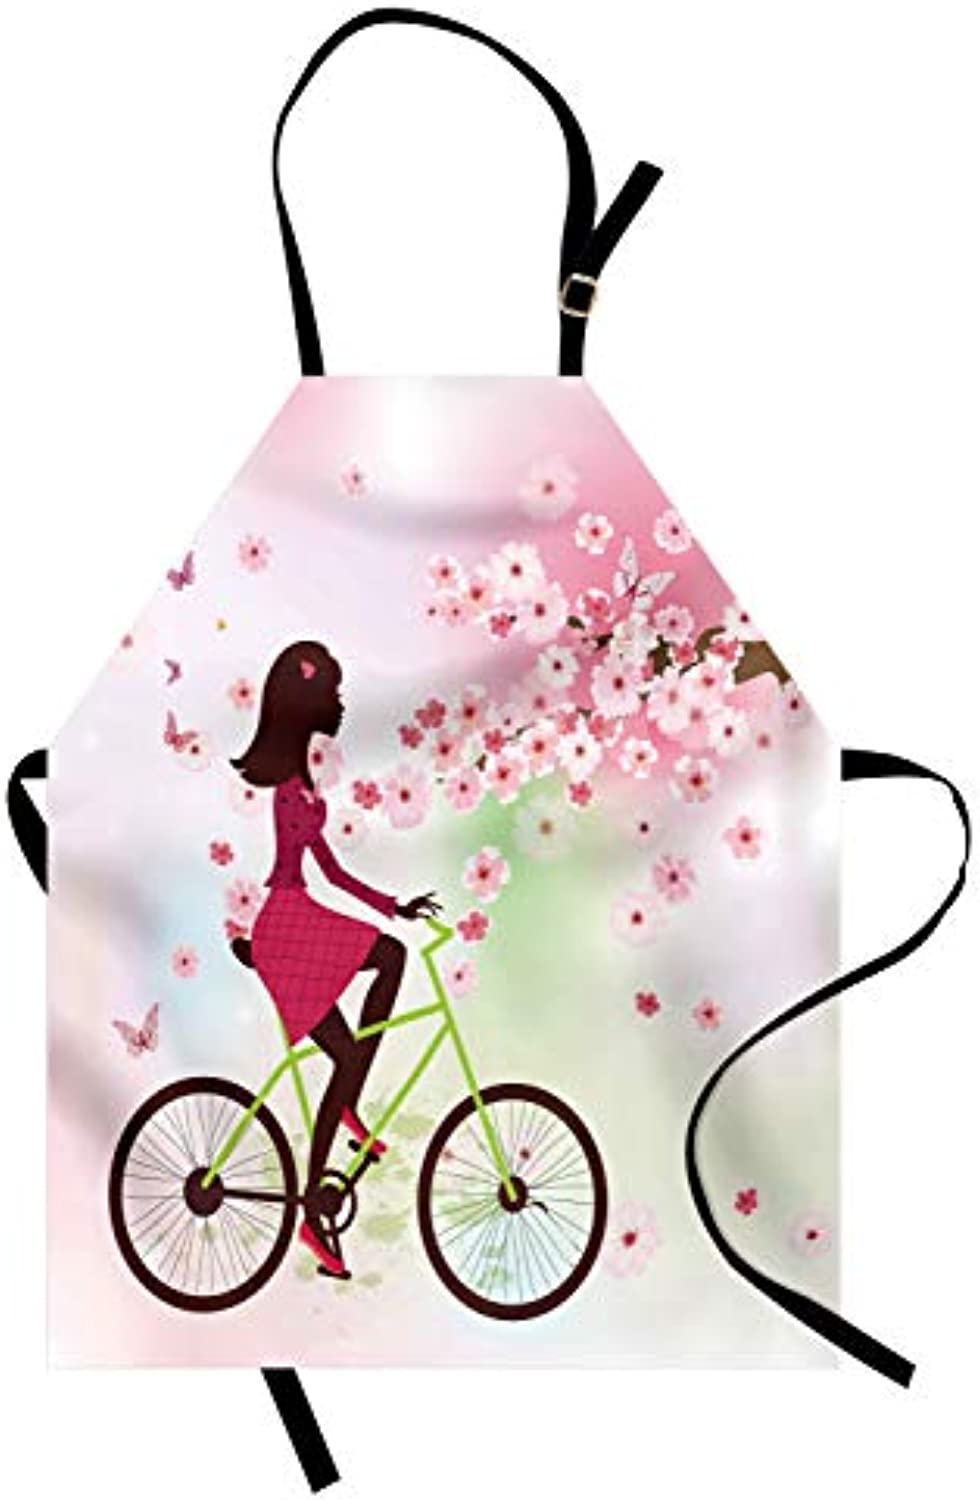 Granbey Feminine Apron  Girl on Bike Passing by Cherry Trees Blooms Spring Nature Seasonal Illustration  Unisex Kitchen Bib with Adjustable Neck for Cooking Gardening  Adult Size  Green Pink